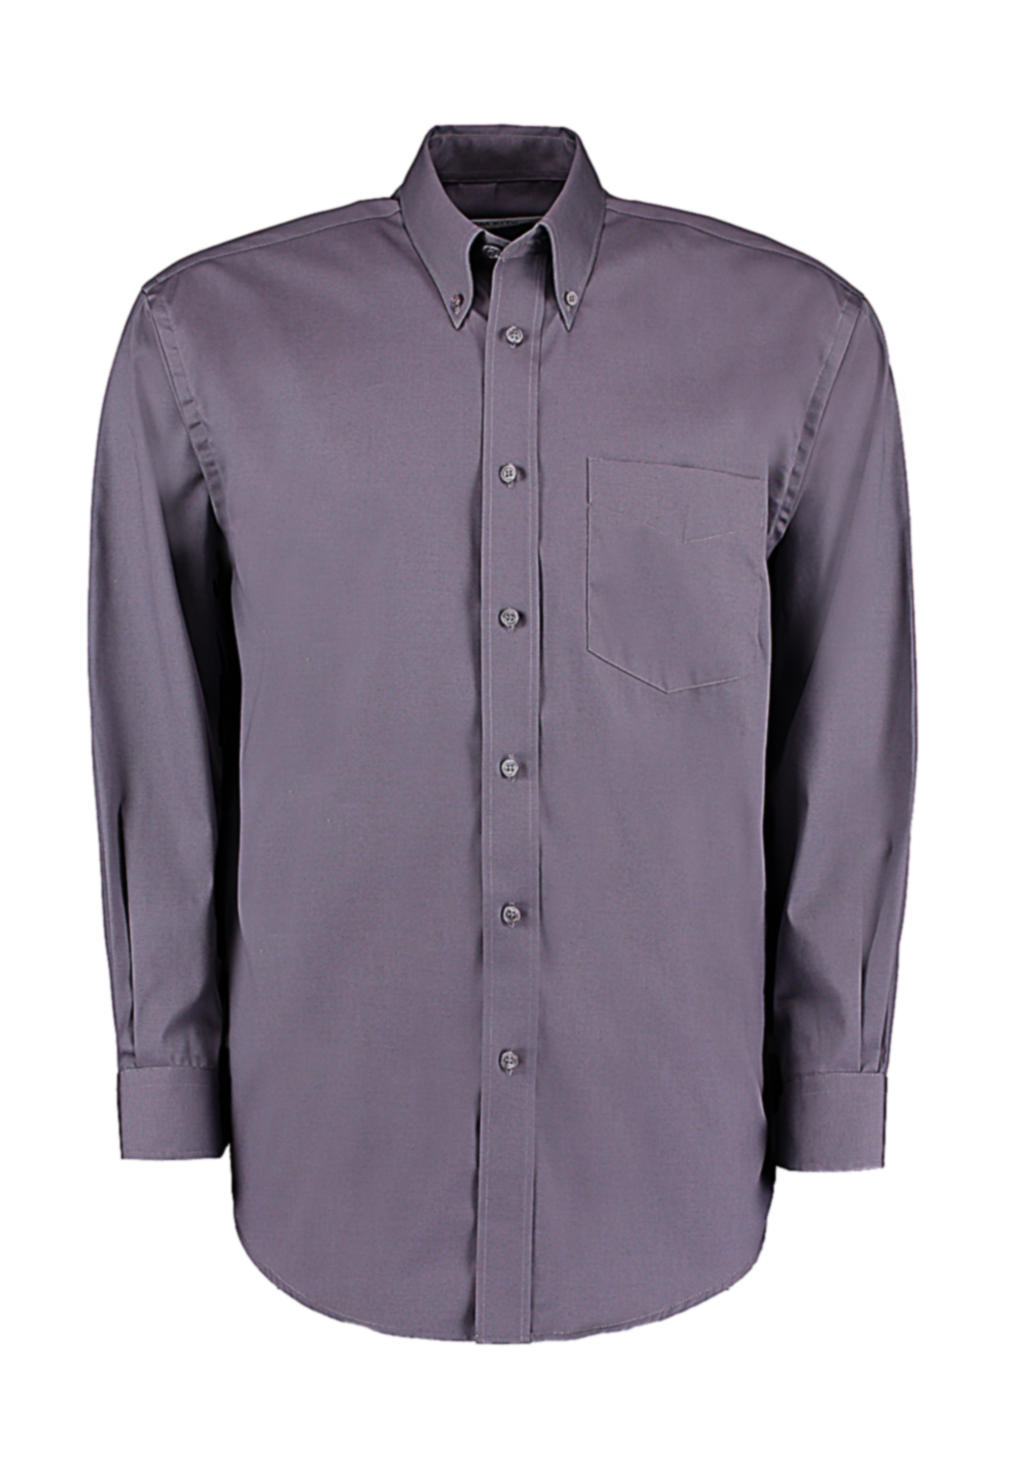  Classic Fit Premium Oxford Shirt in Farbe Charcoal